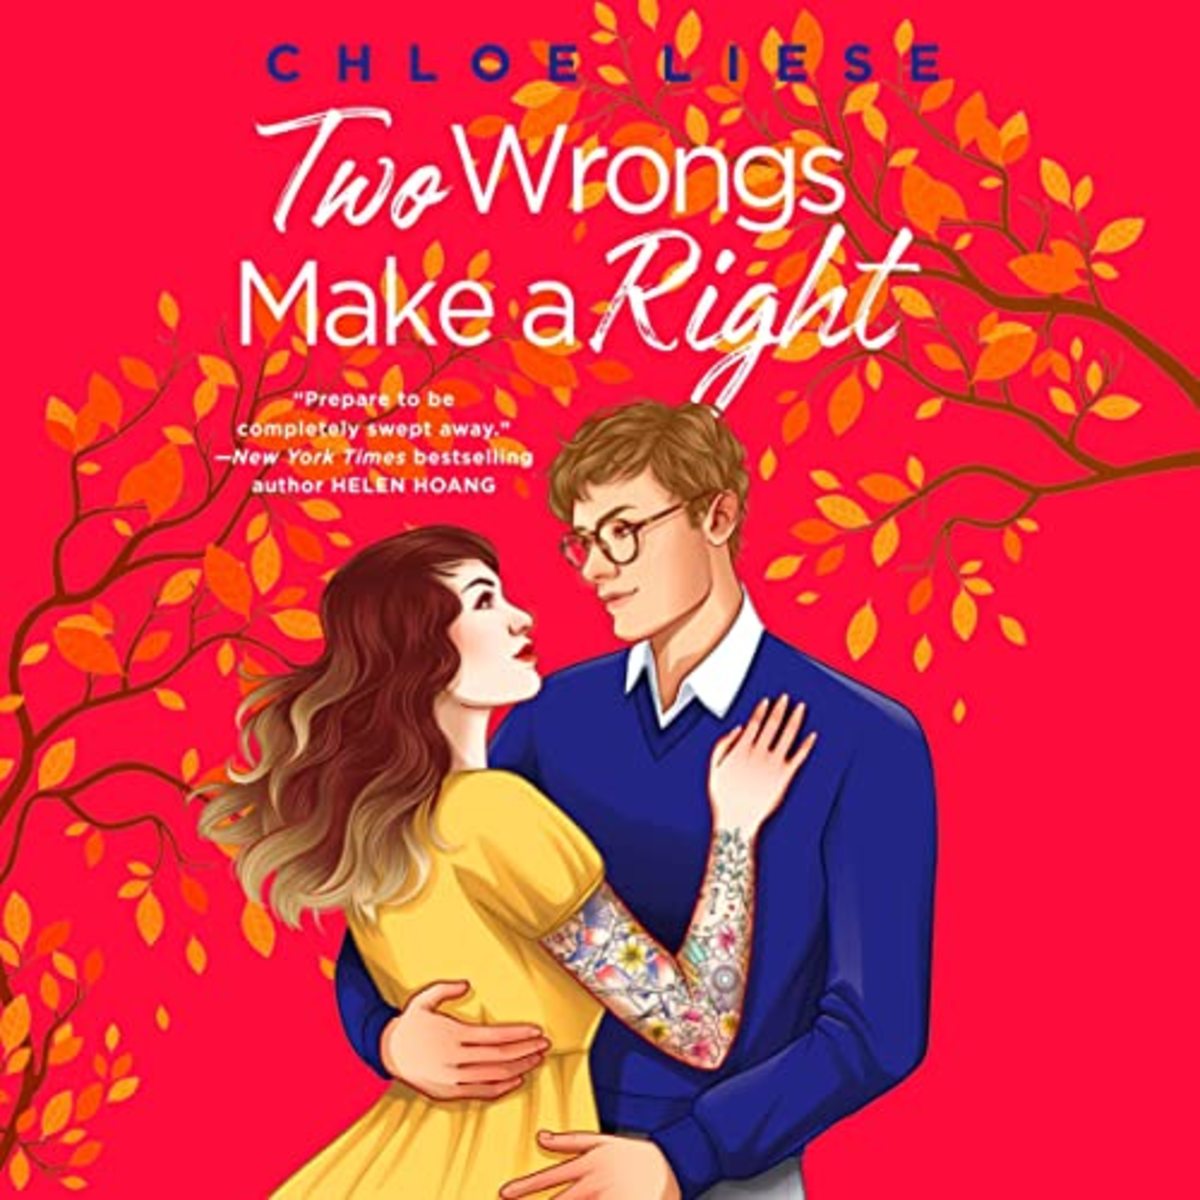 Book Review: Two Wrongs Make a Right by Chloe Liese